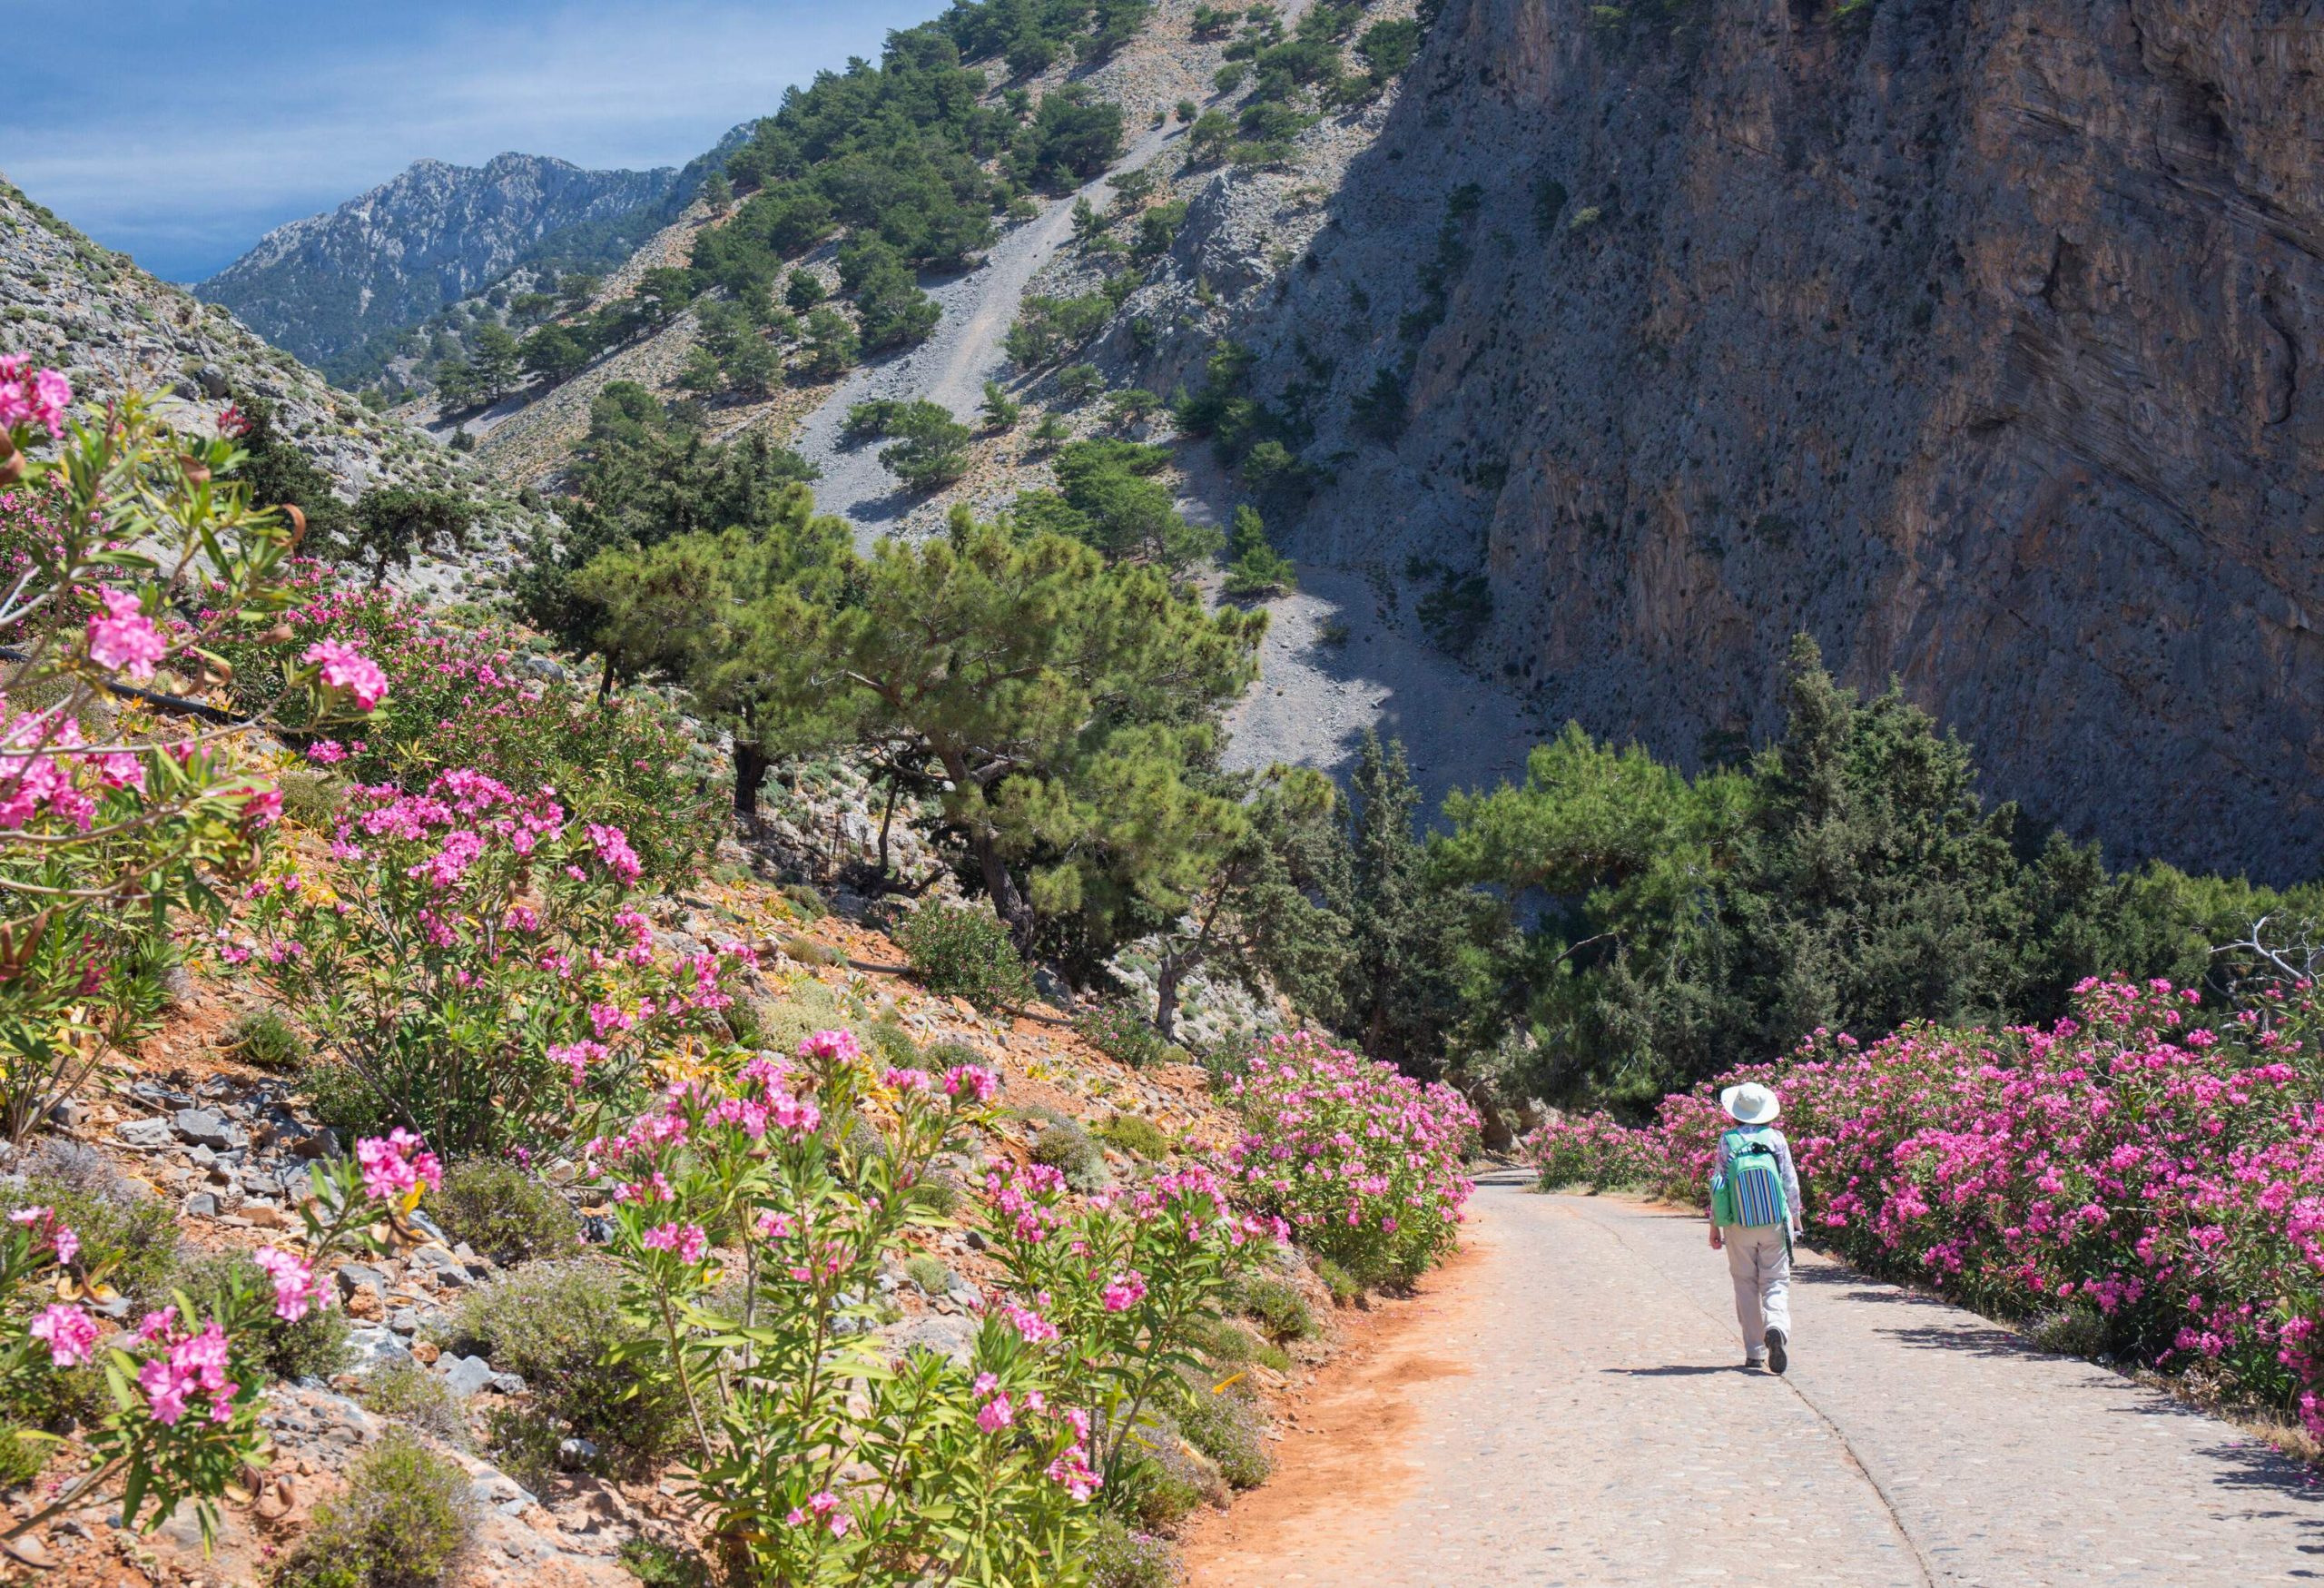 A lady hiker walks on a concrete road surrounded by lush pink flowers at the base of a steep mountain.